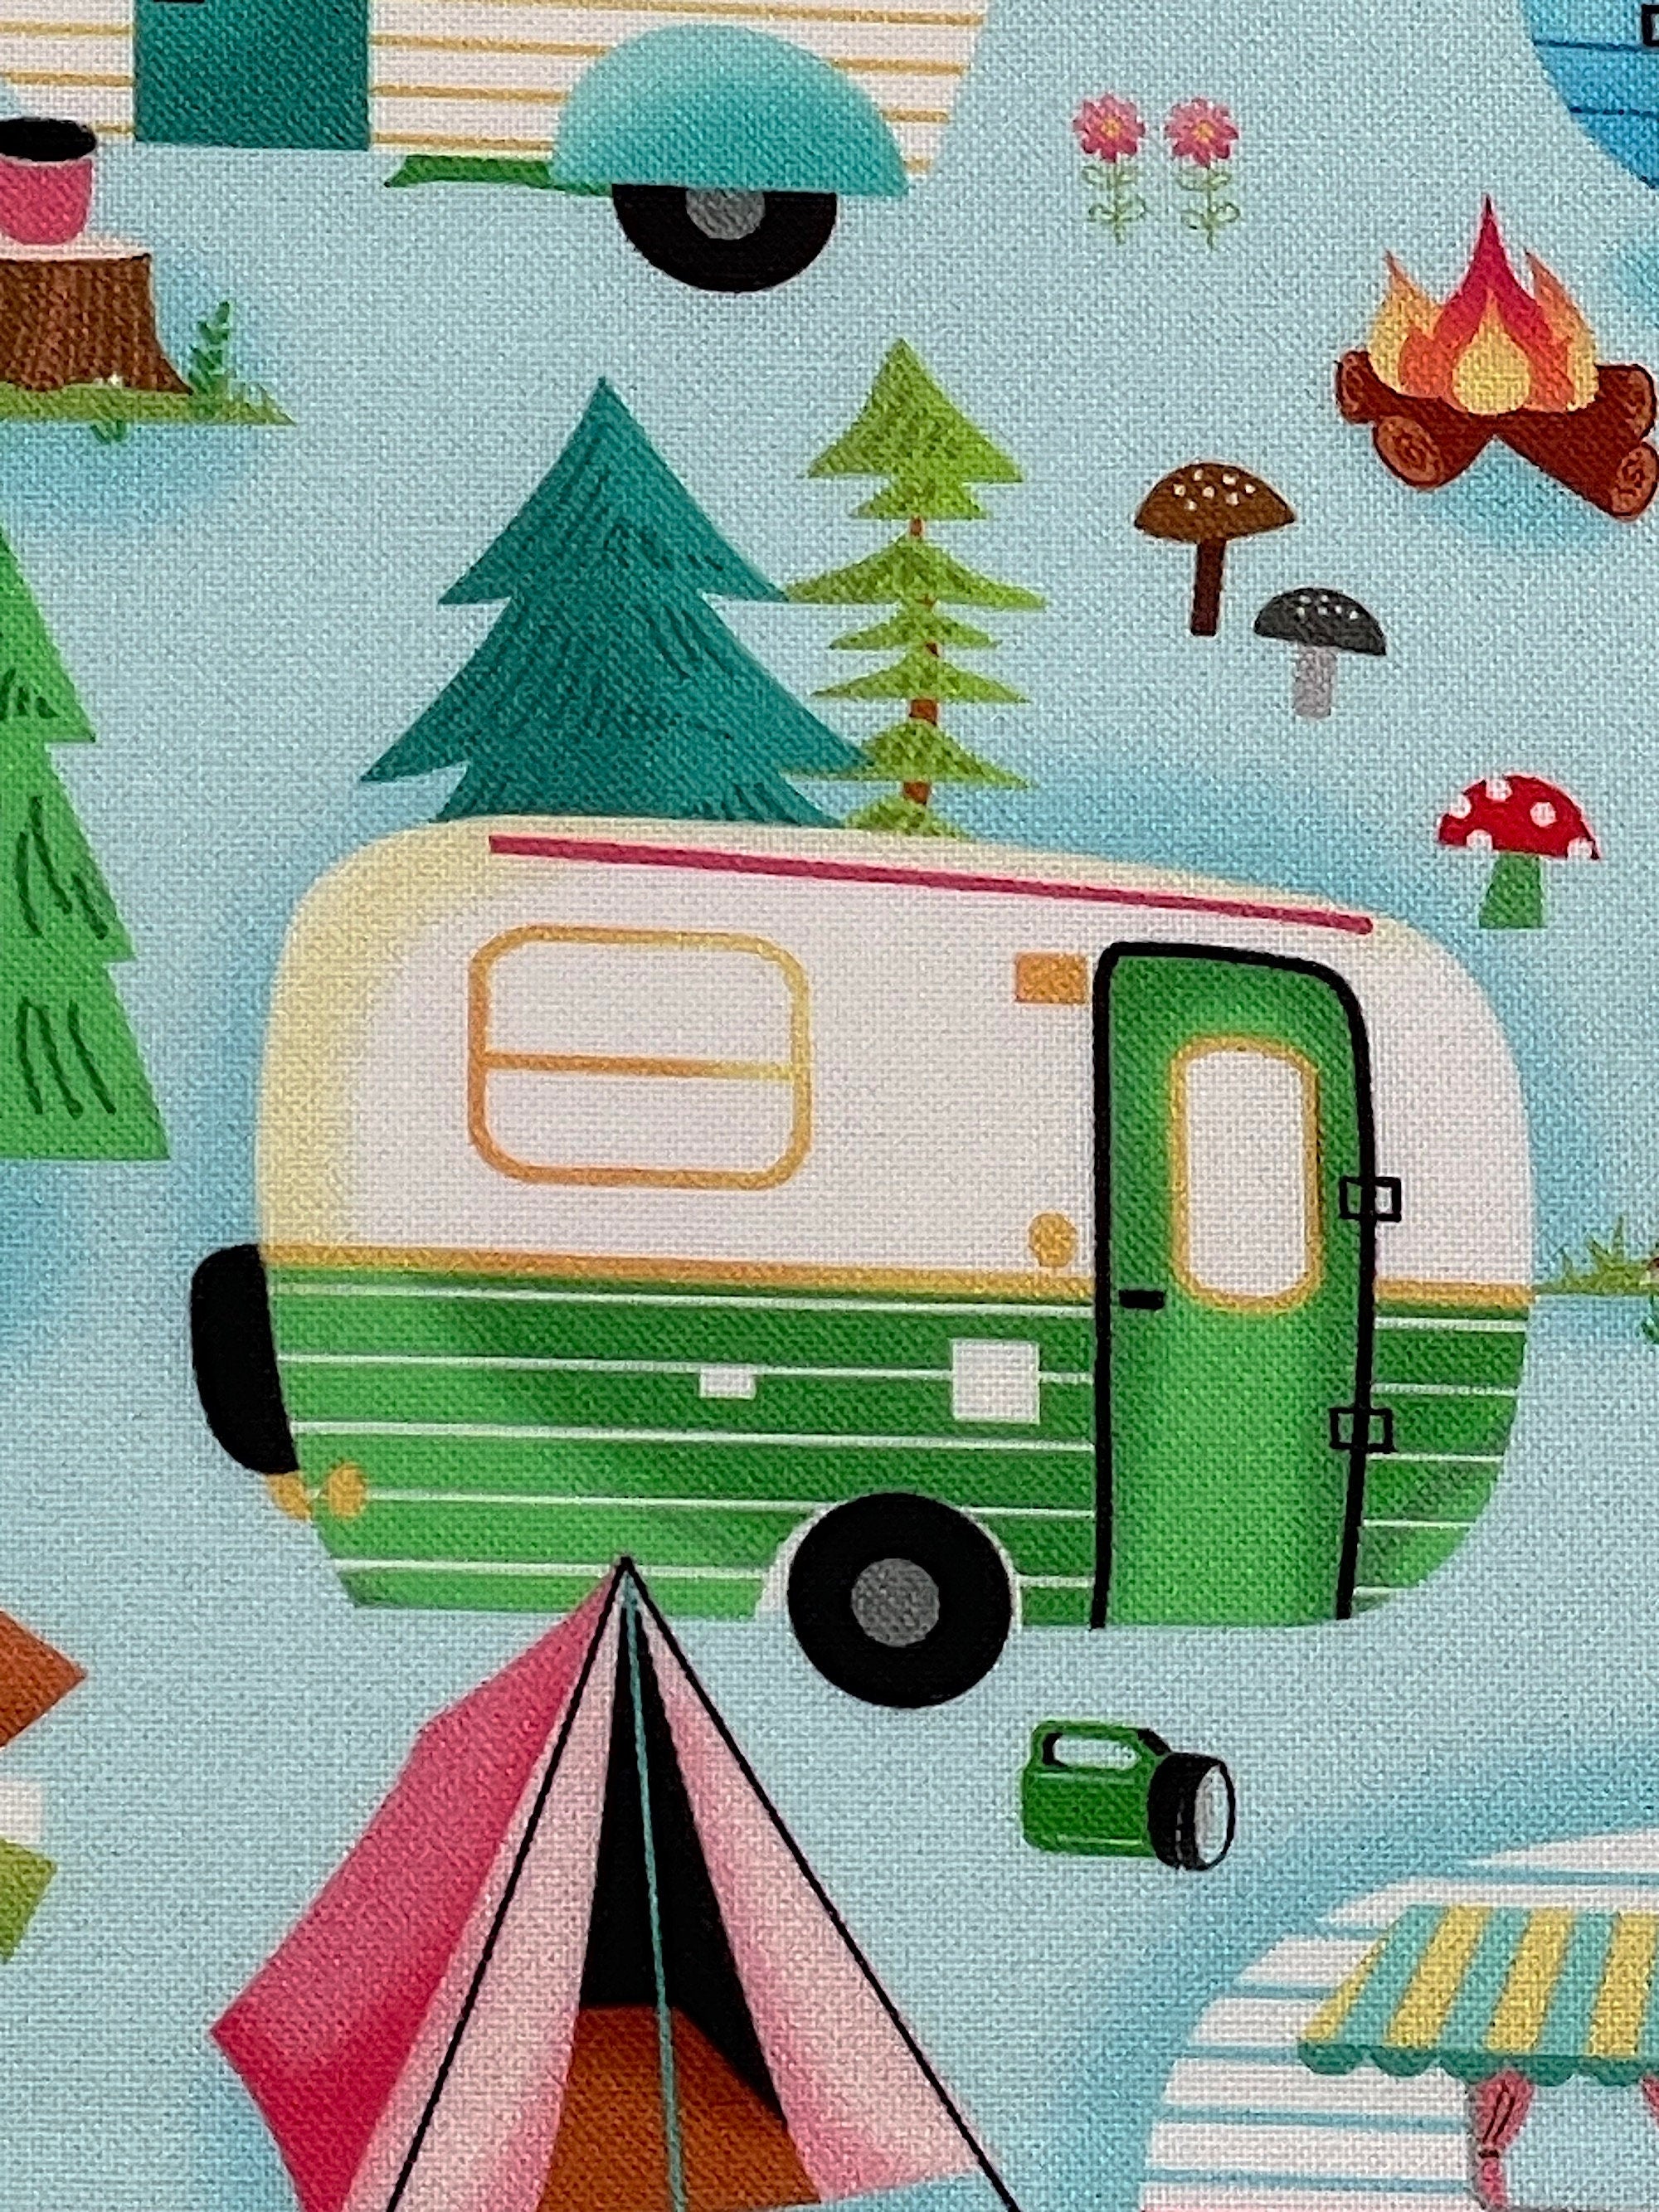 Close up of a green and white travel trailer with trees in the background.